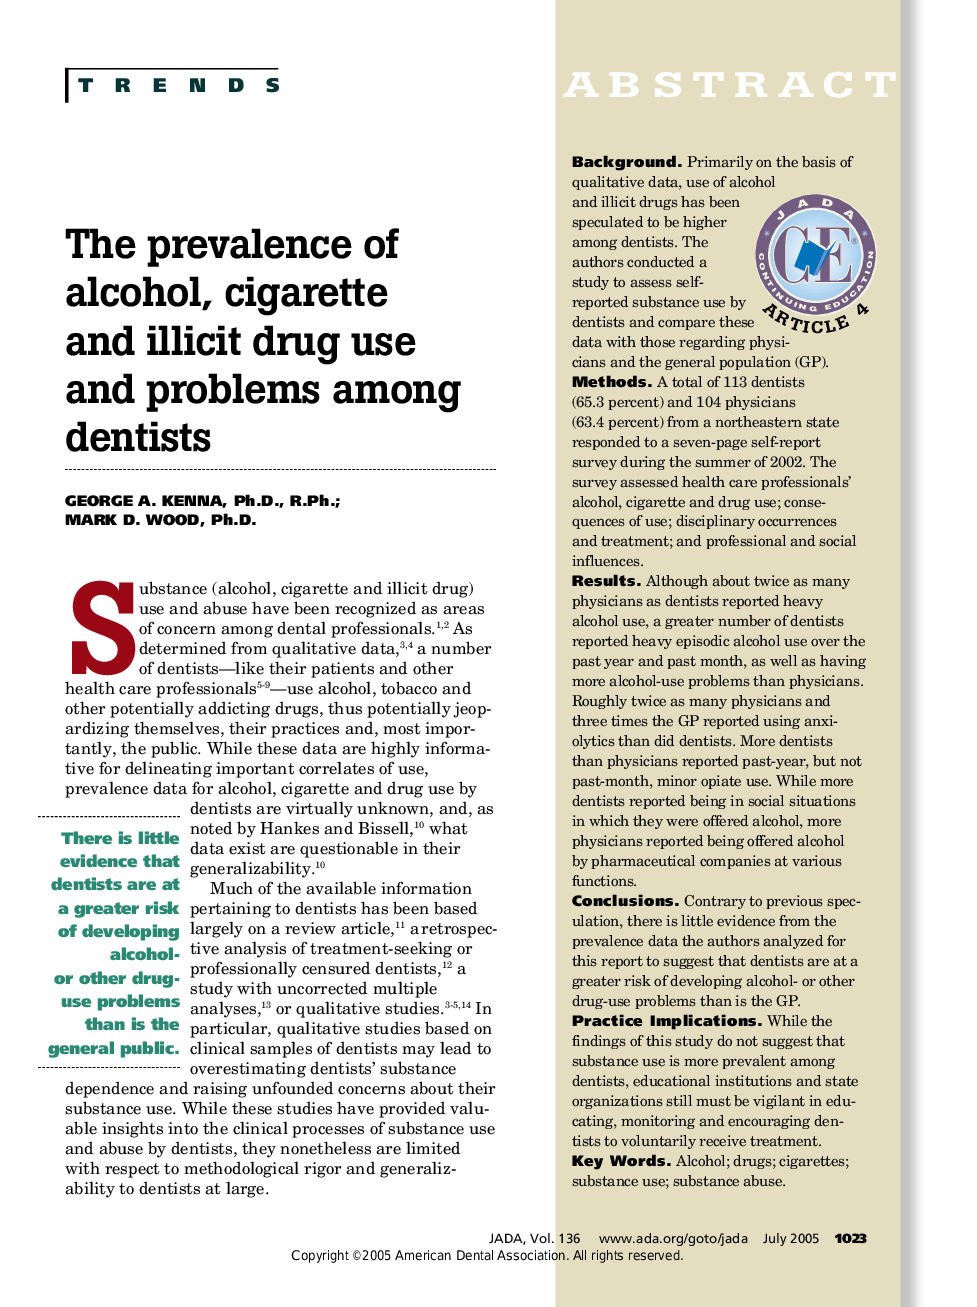 The prevalence of alcohol, cigarette and illicit drug use and problems among dentists